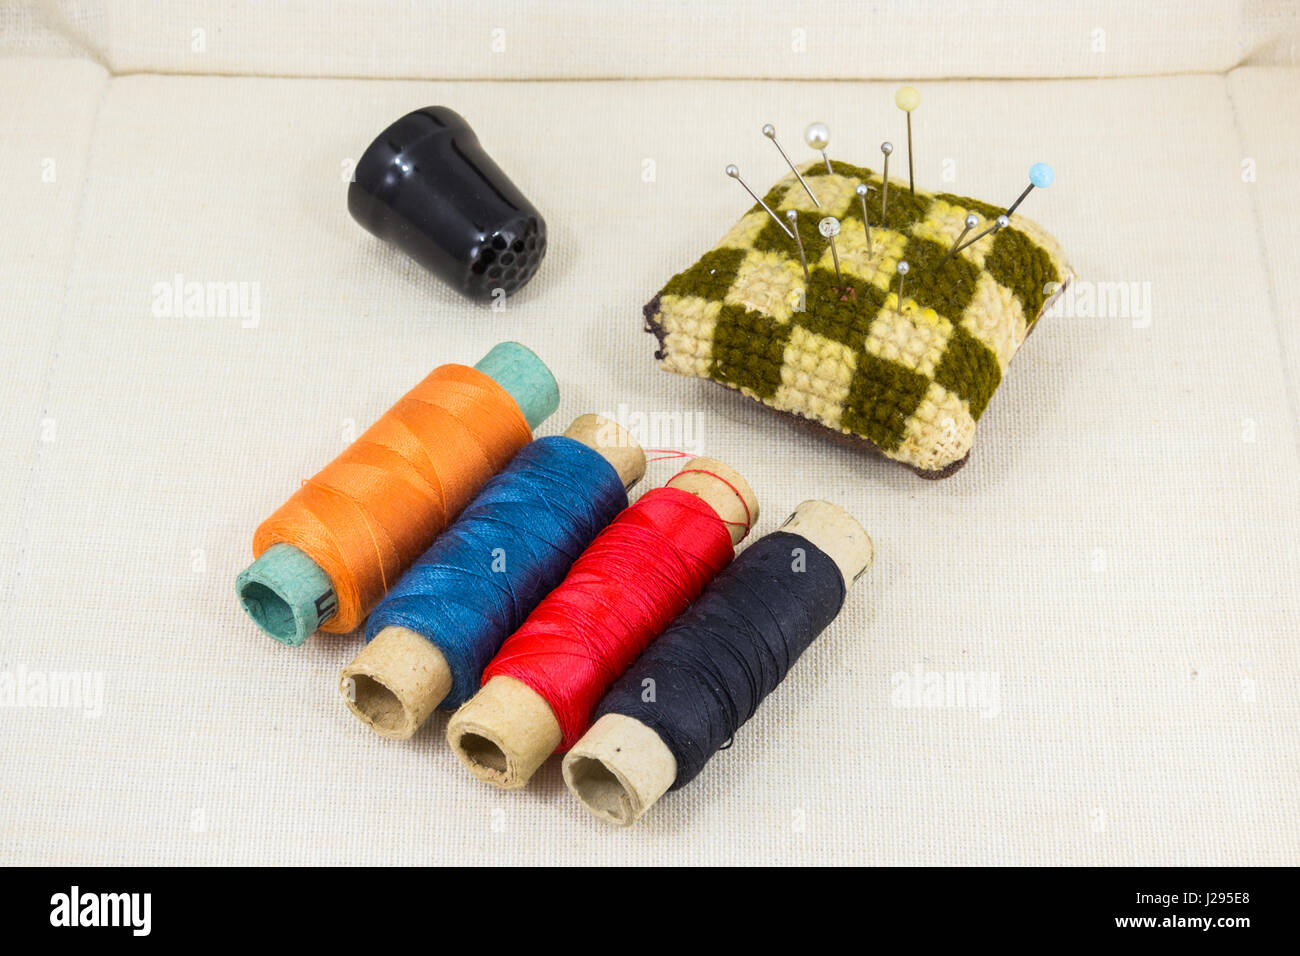 Beautifully laid out accessories for needlework on a fabric background Stock Photo